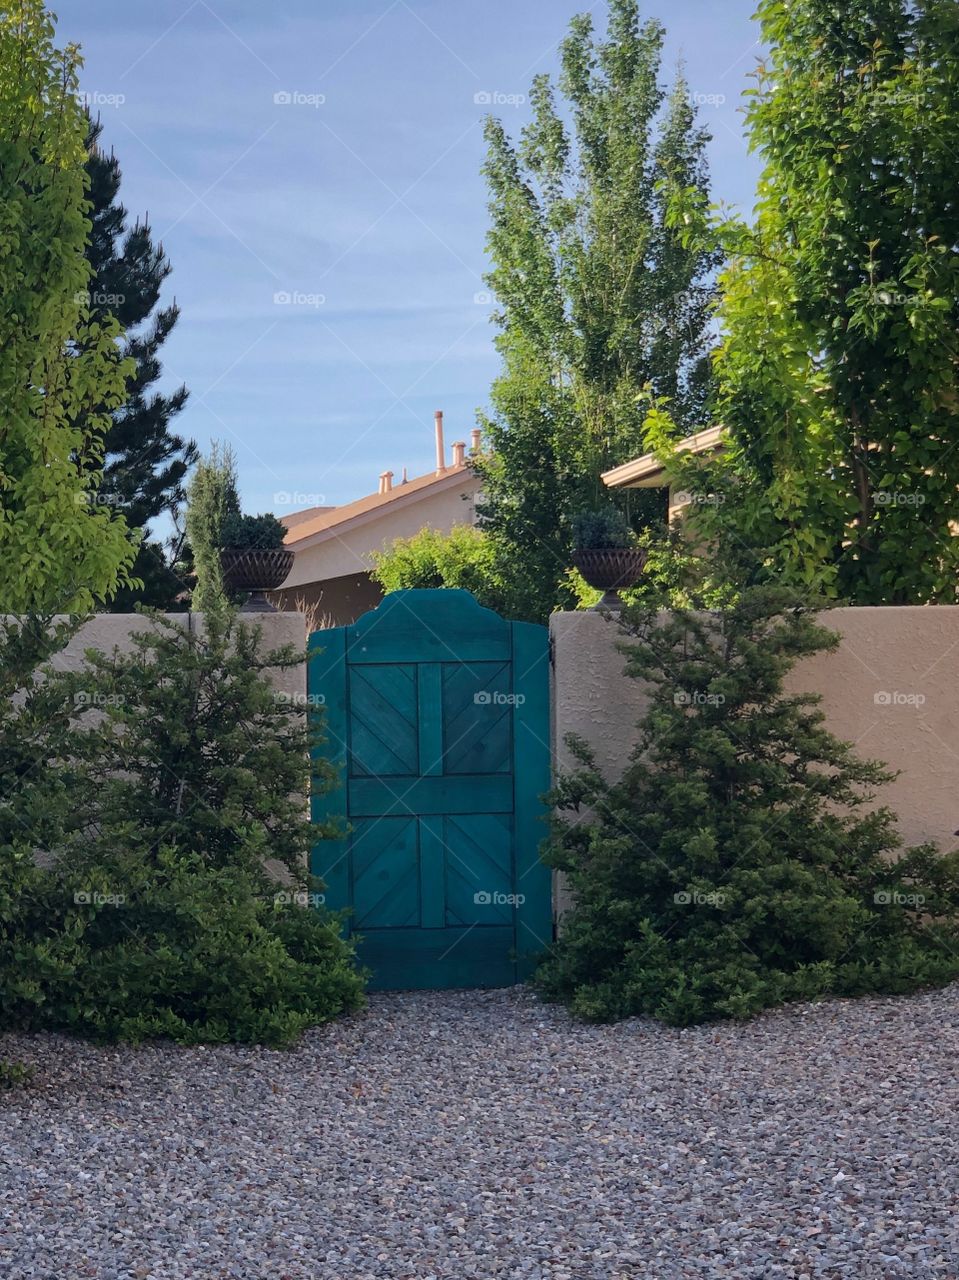 Turquoise door in stucco fence surrounded by small pine trees